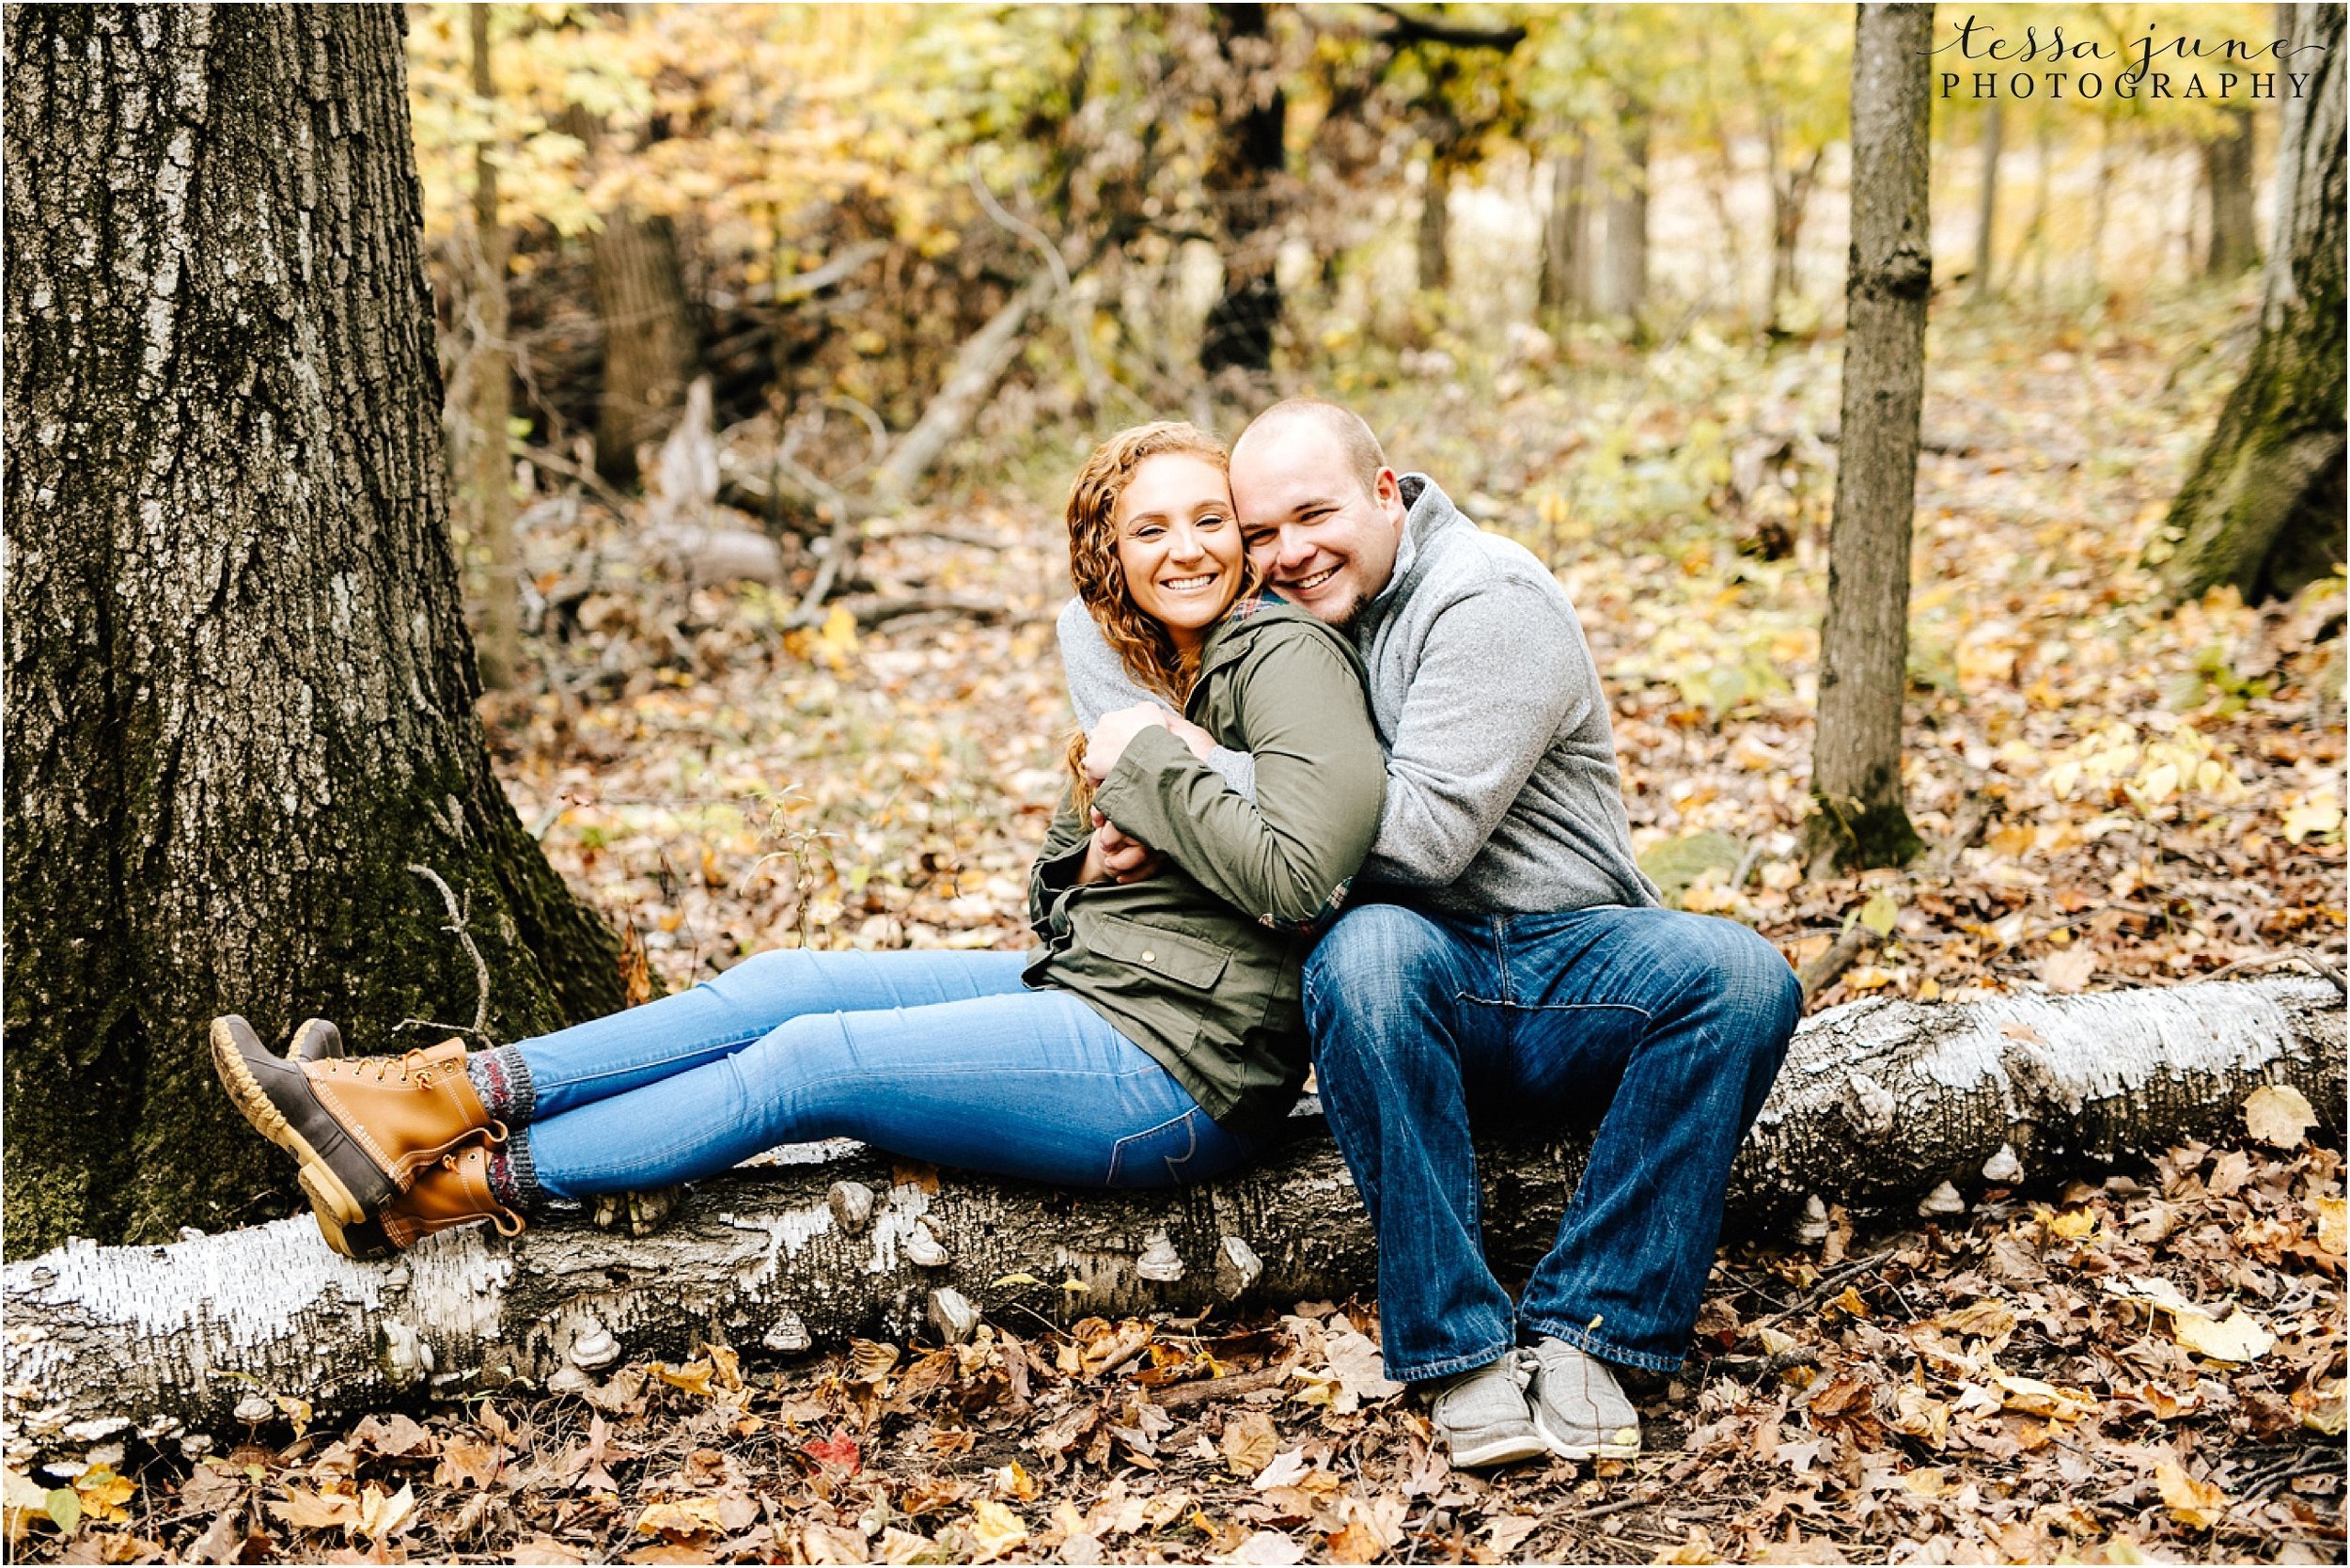 st-cloud-wedding-photographer-lake-maria-engagement-in-the-fall-9.jpg